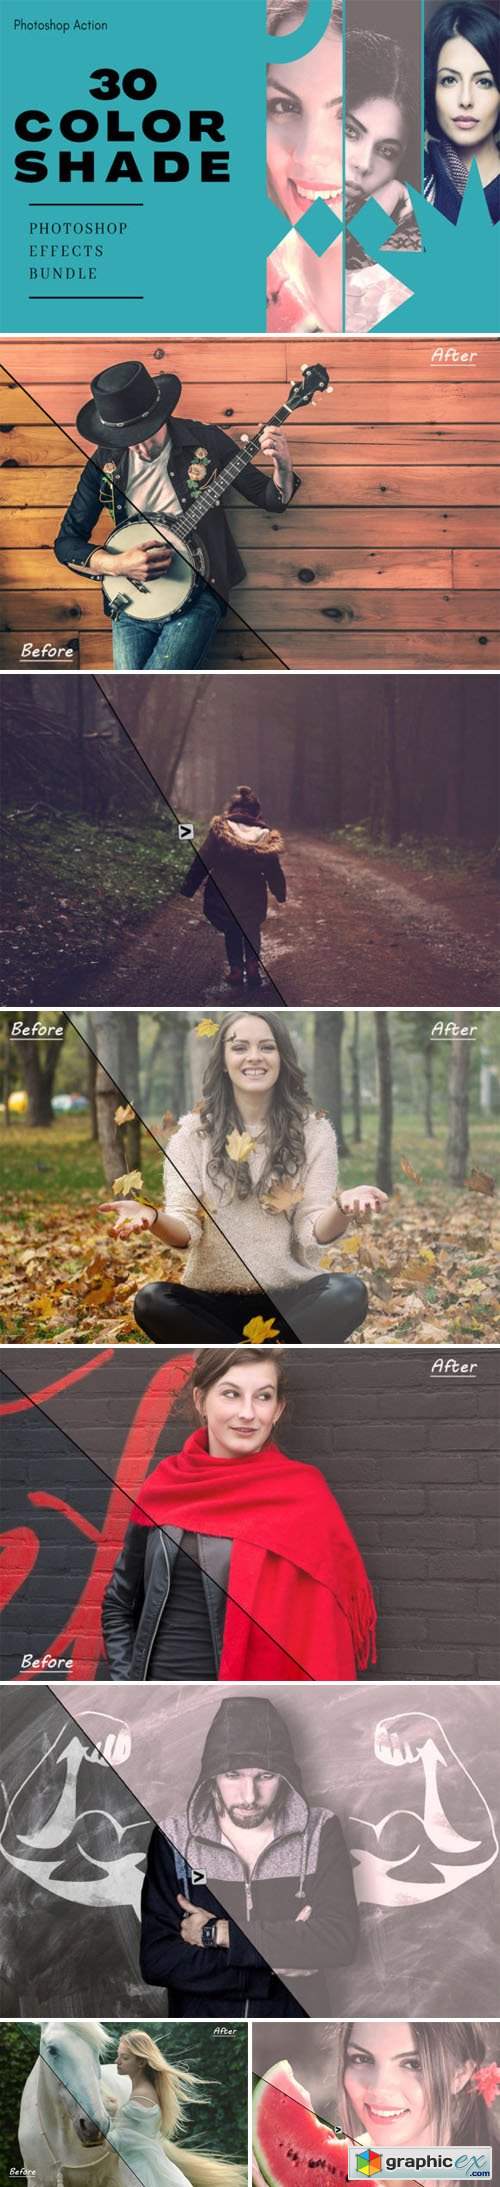  30 Color Shade Effects - Photoshop Action Bundle 